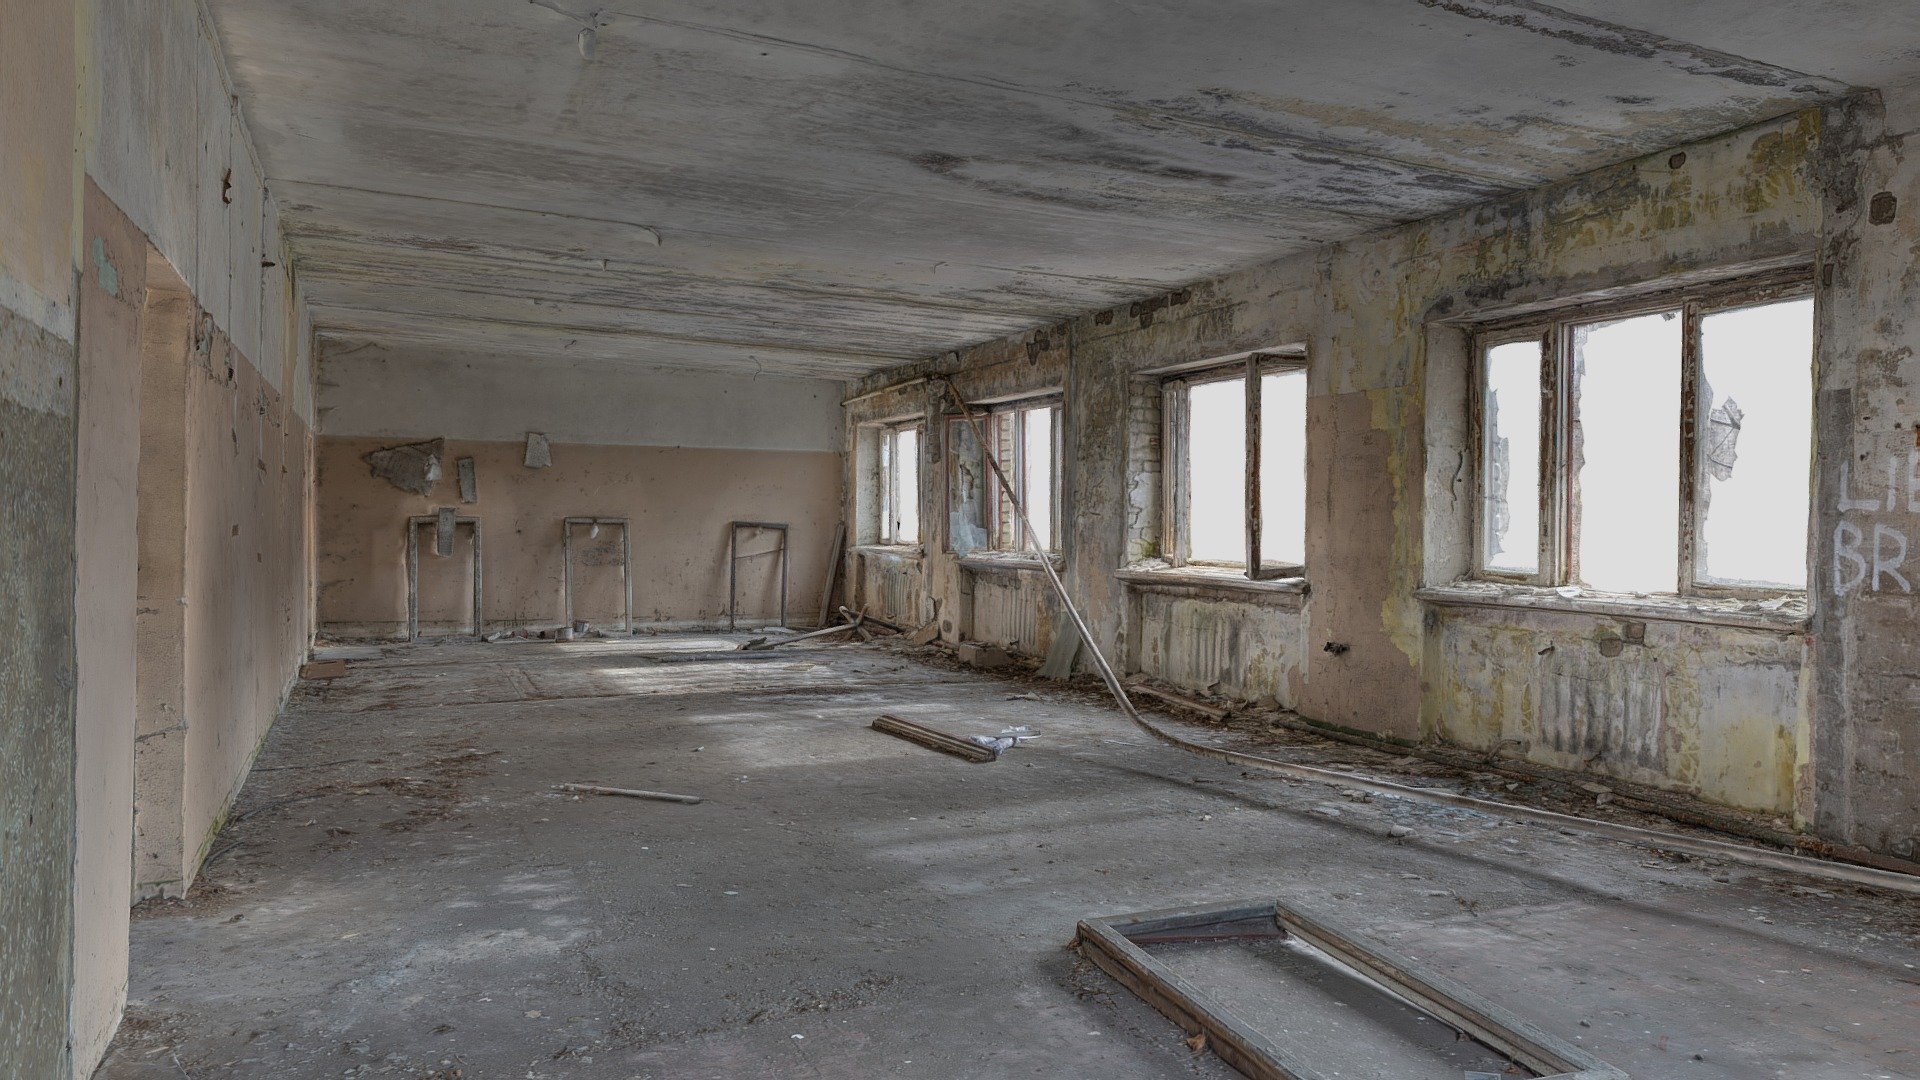 3D scan of an old, abandoned, soviet industrial room.
Cleared of any valuable things.
With normal map 3d model